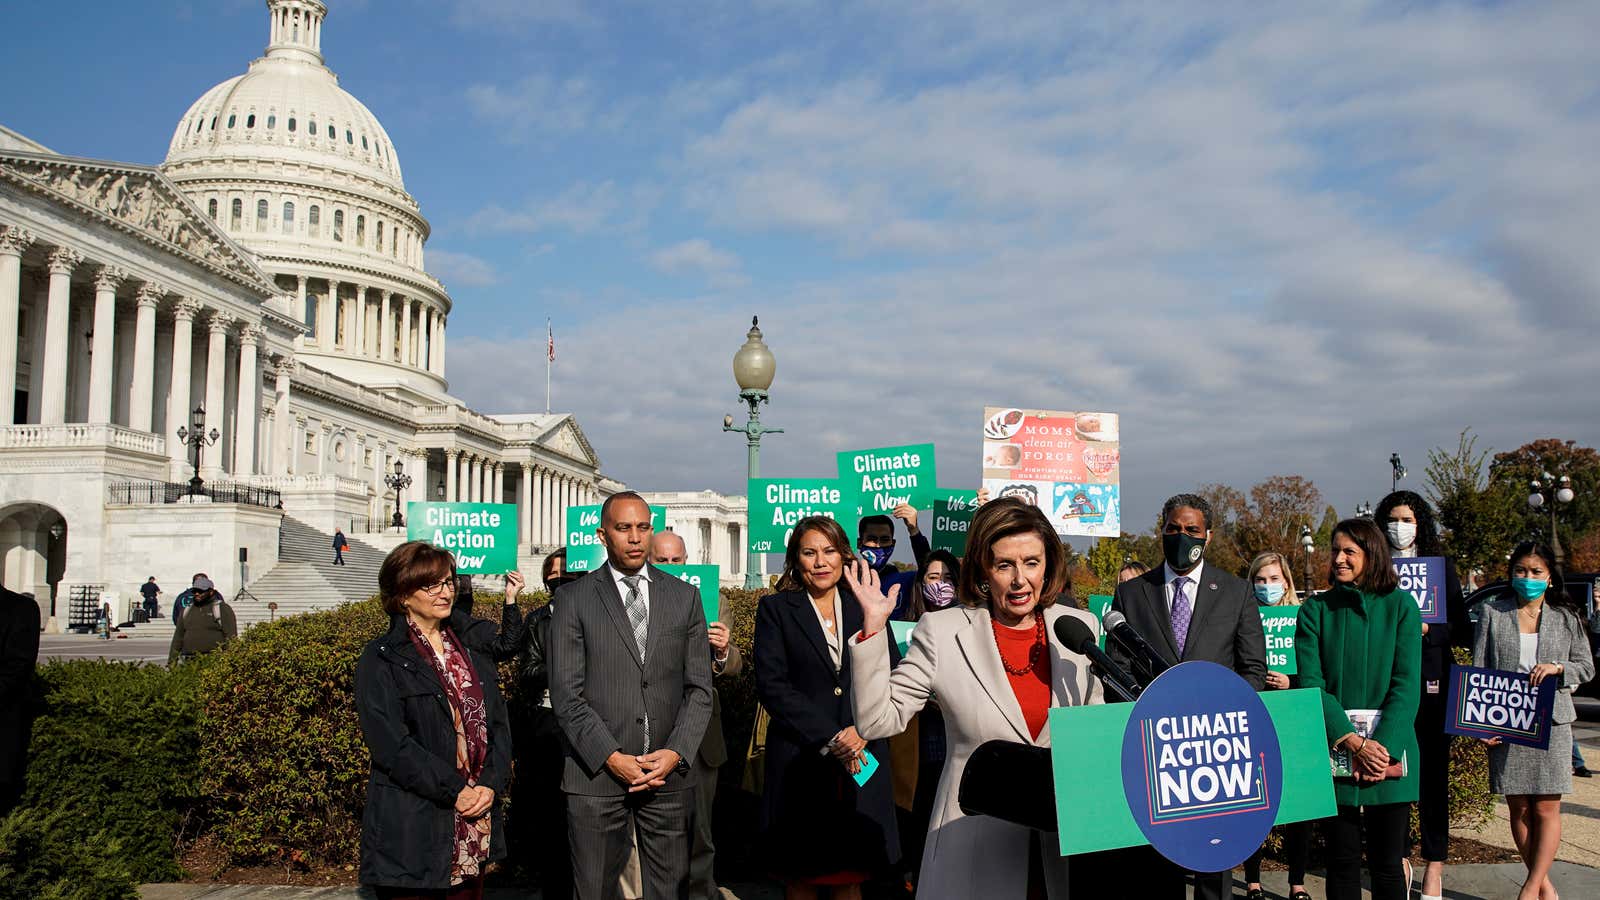 House Speaker Nancy Pelosi (D-CA) and Congressional Democrats discuss the â€˜Build Back Better Actâ€™ and climate investments during a news conference at the U.S. Capitolâ€¦